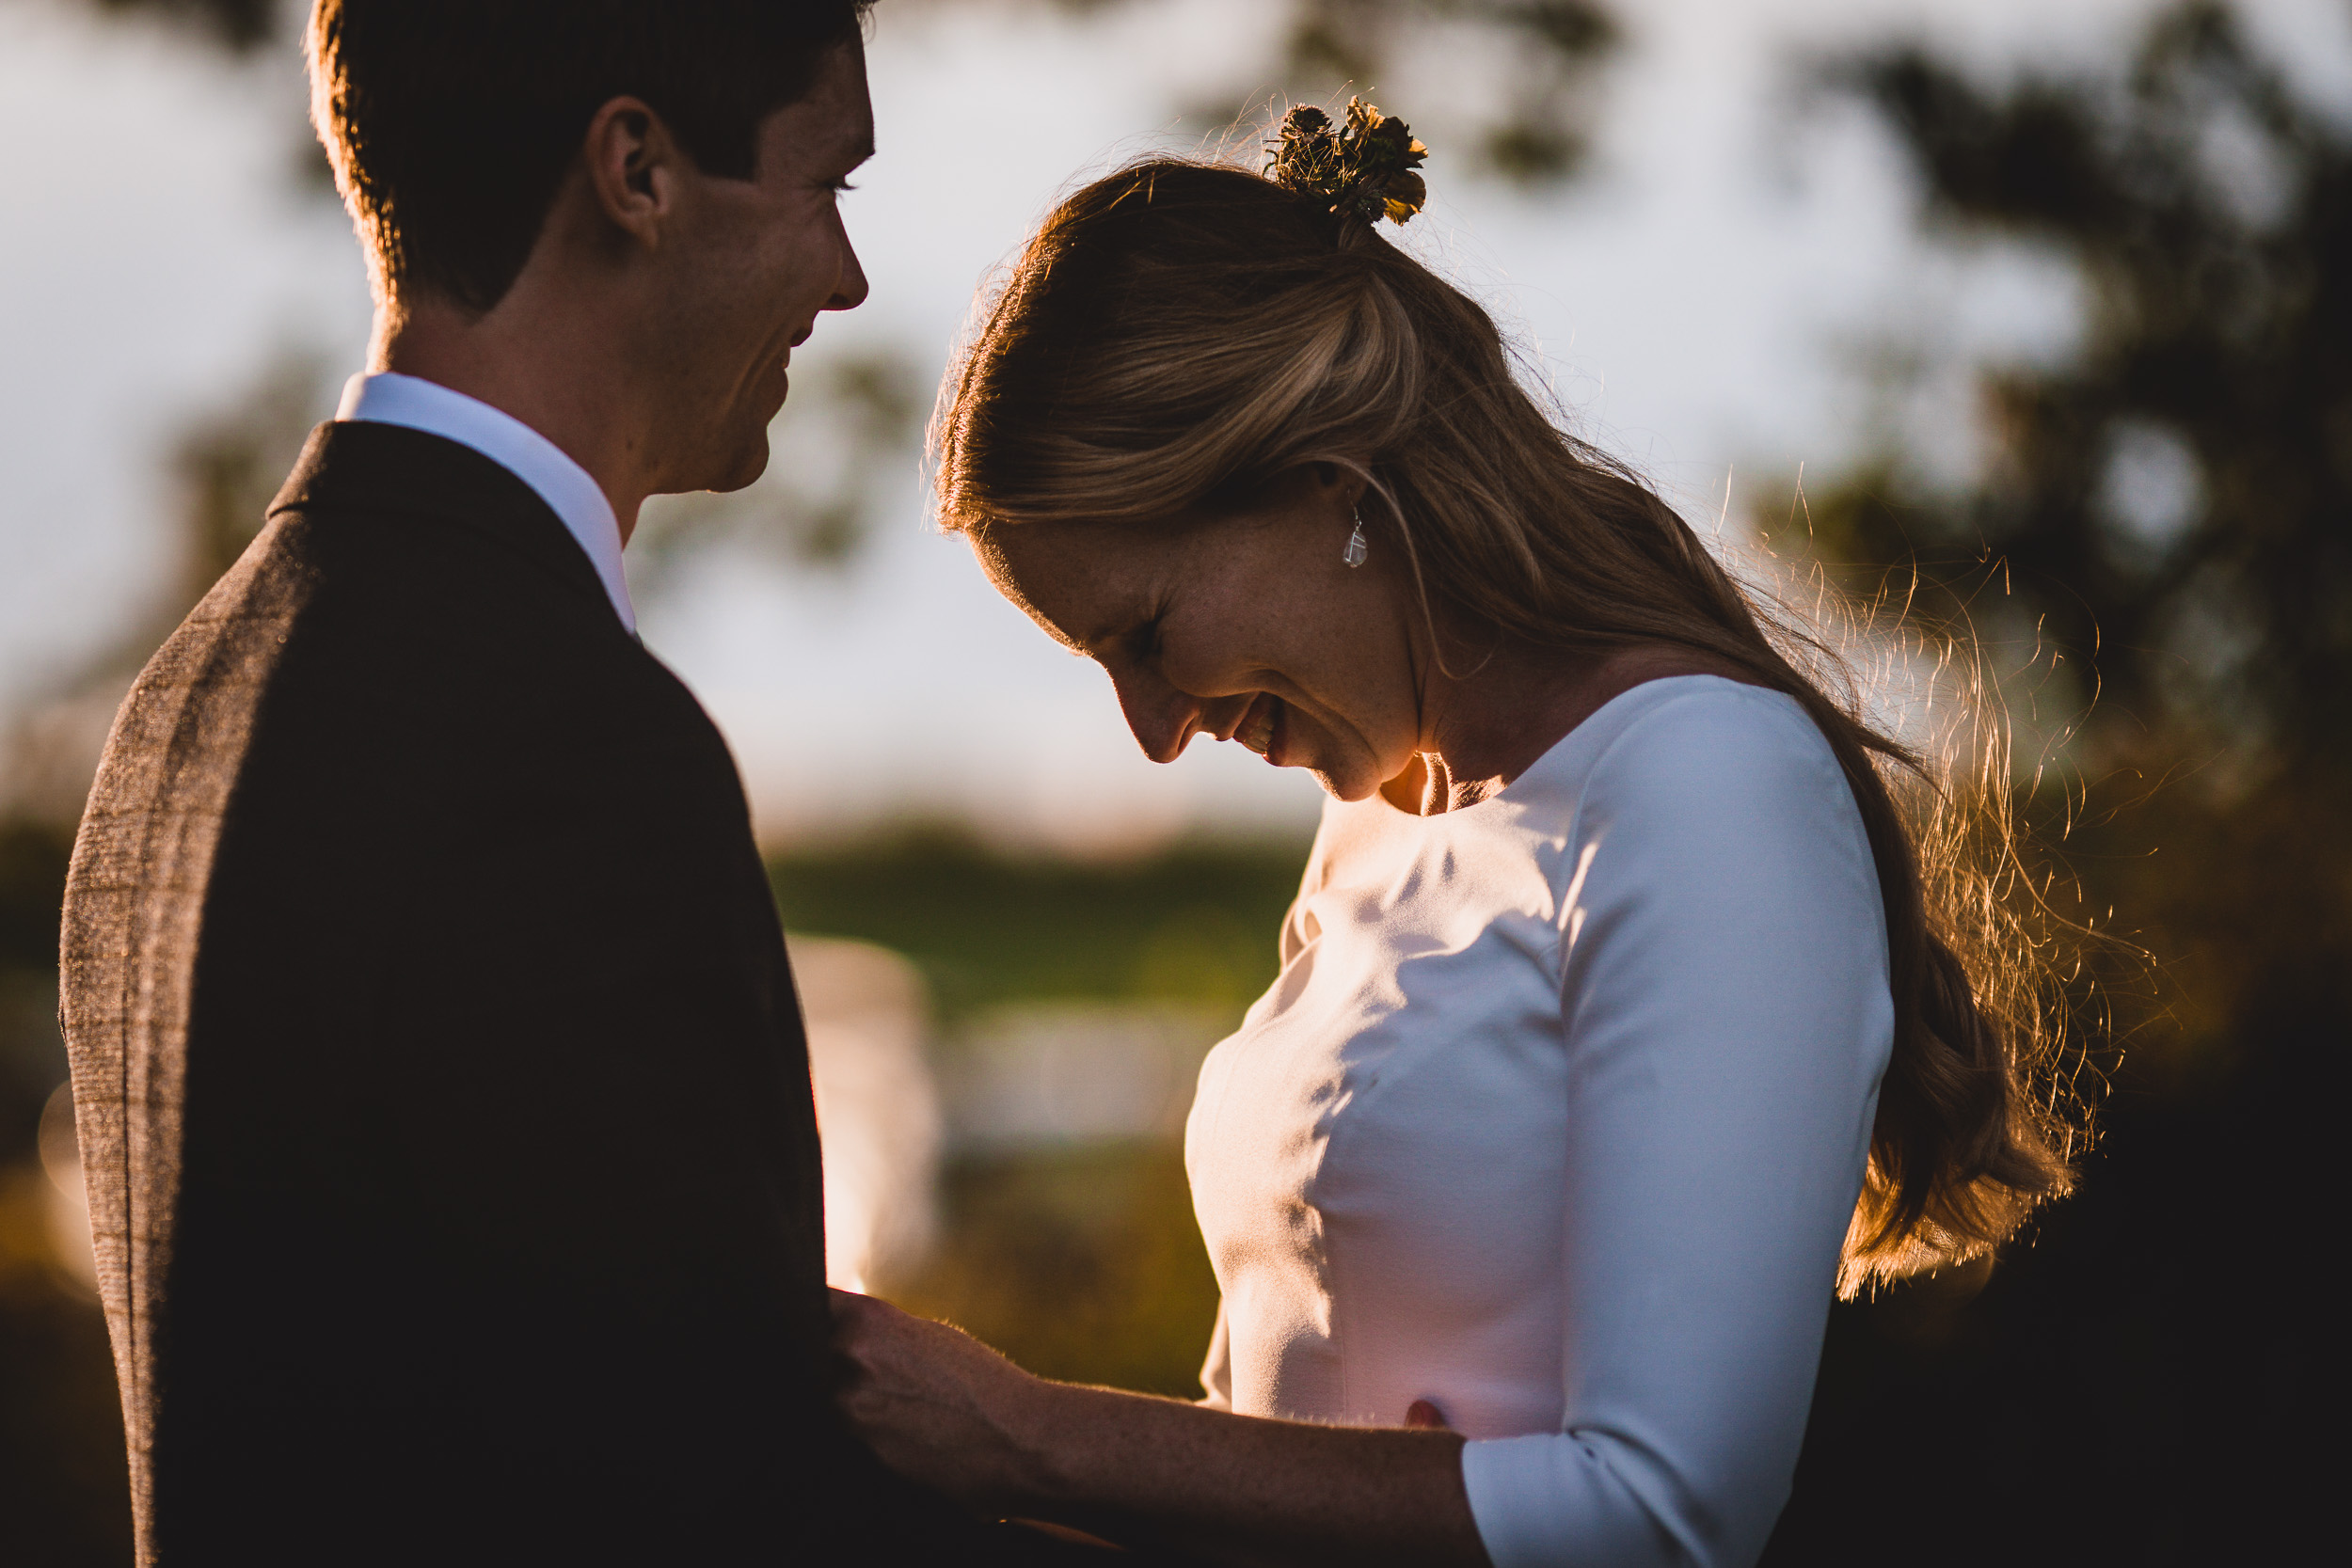 A wedding photo captures the intimate moment of a bride and groom gazing at each other during sunset.